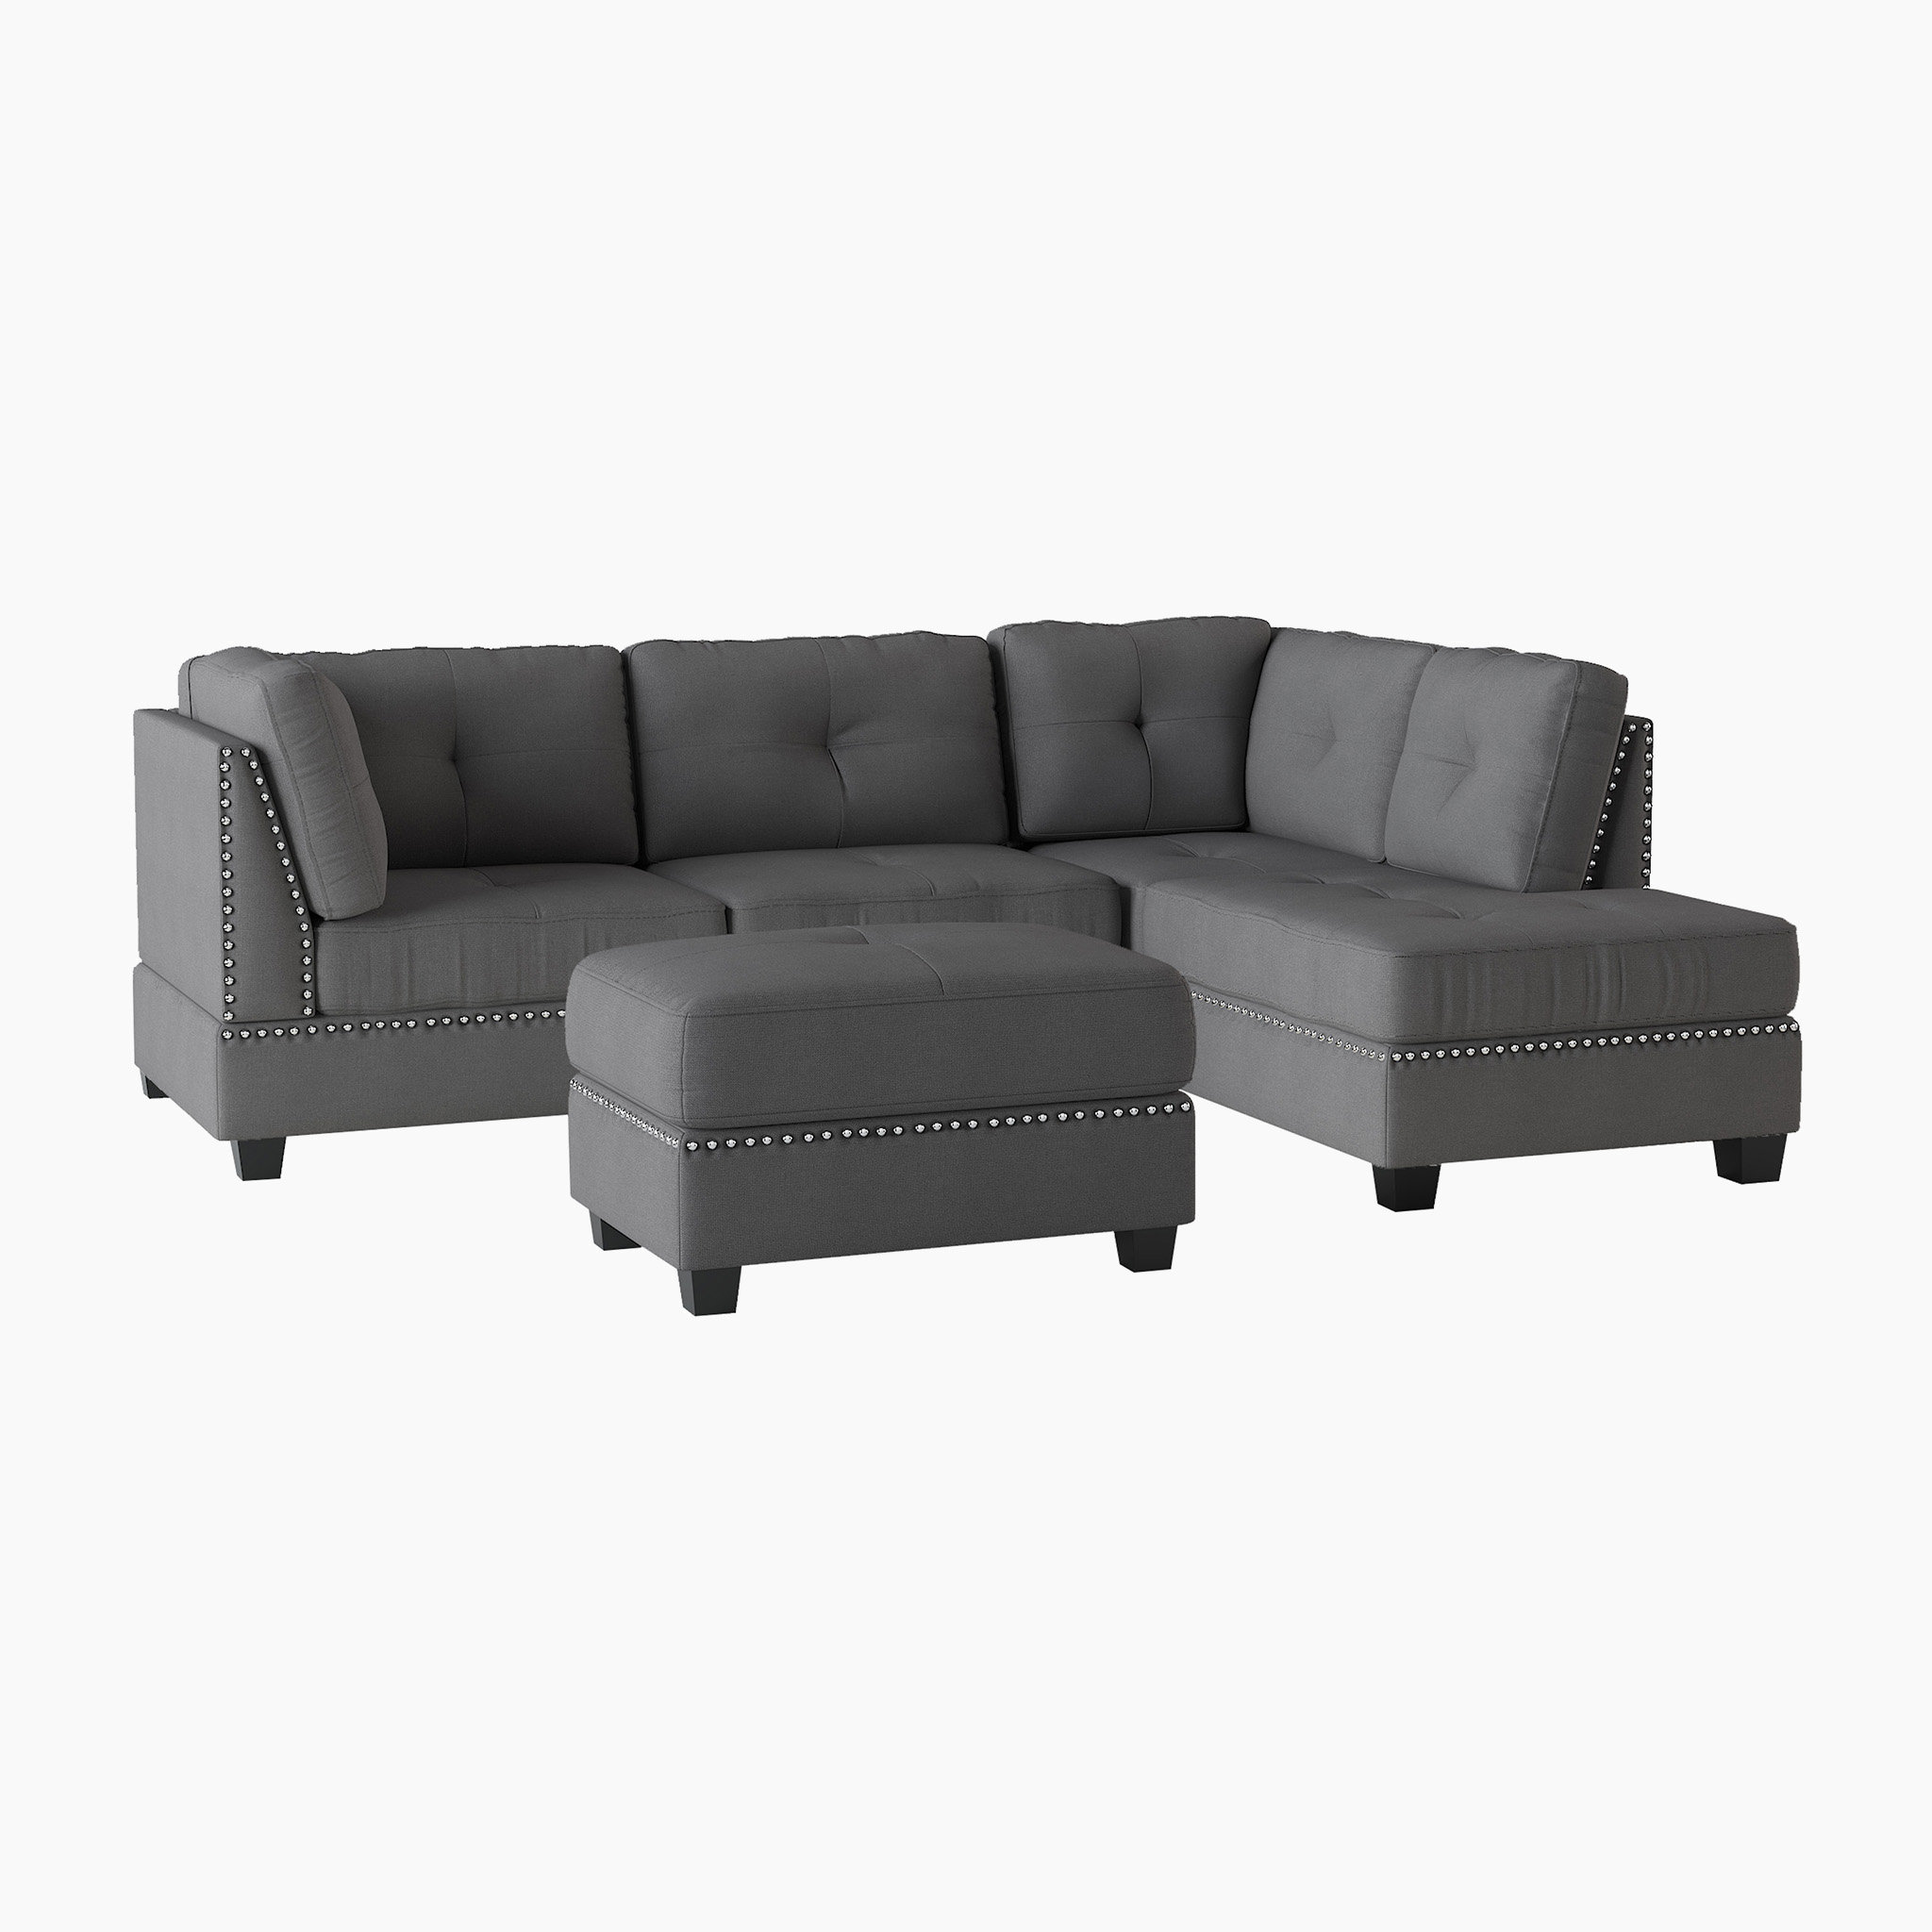 Fabric Upholstered Sectional Sofa Chaise With Ottoman 